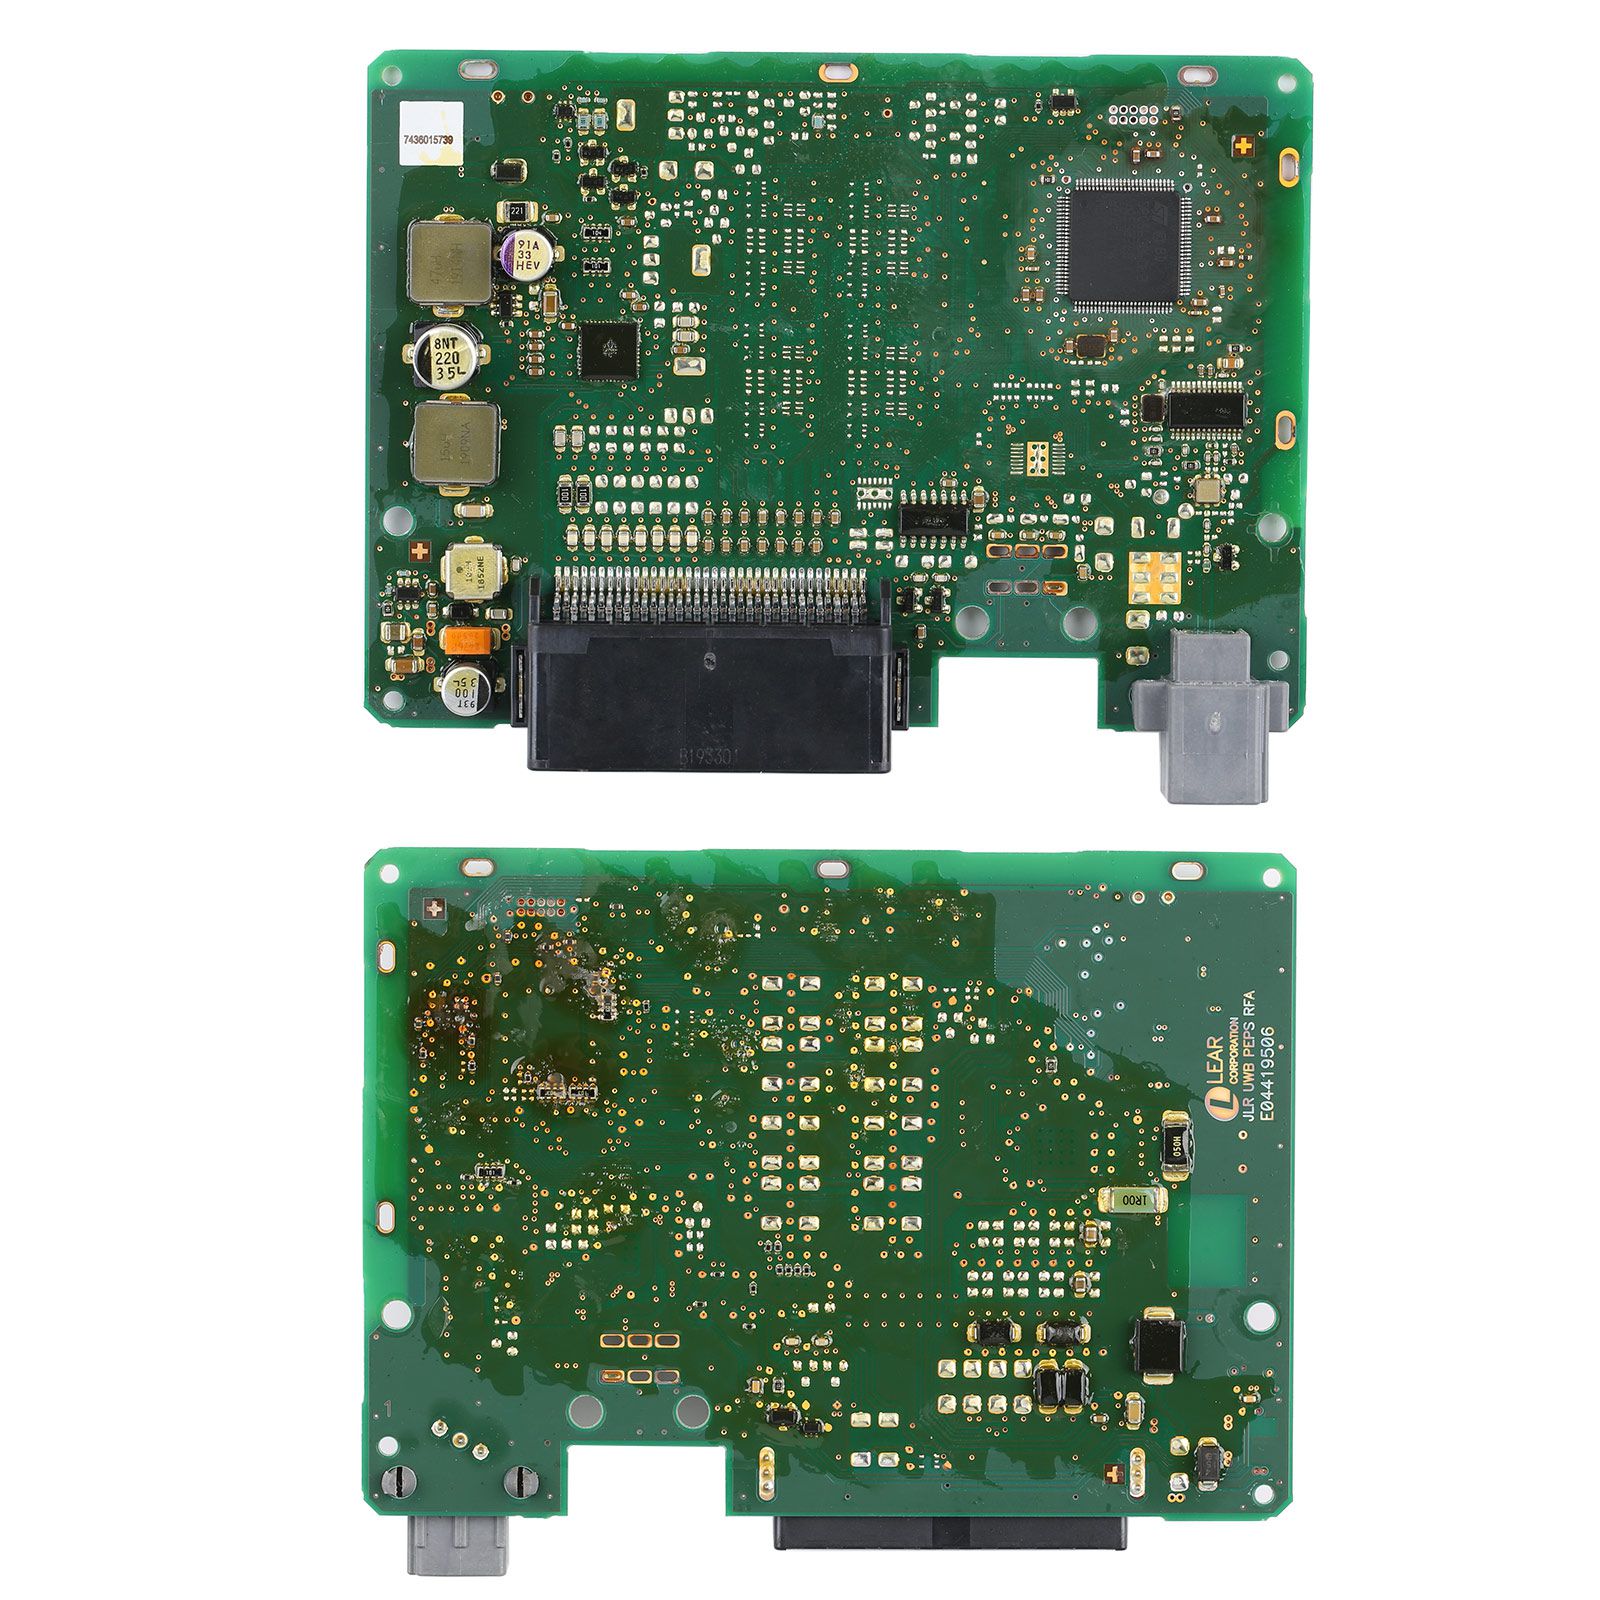 OEM Jaguar Land Rover RFA Module JPLA without Comfort Access contains SPC560B Chip and Data